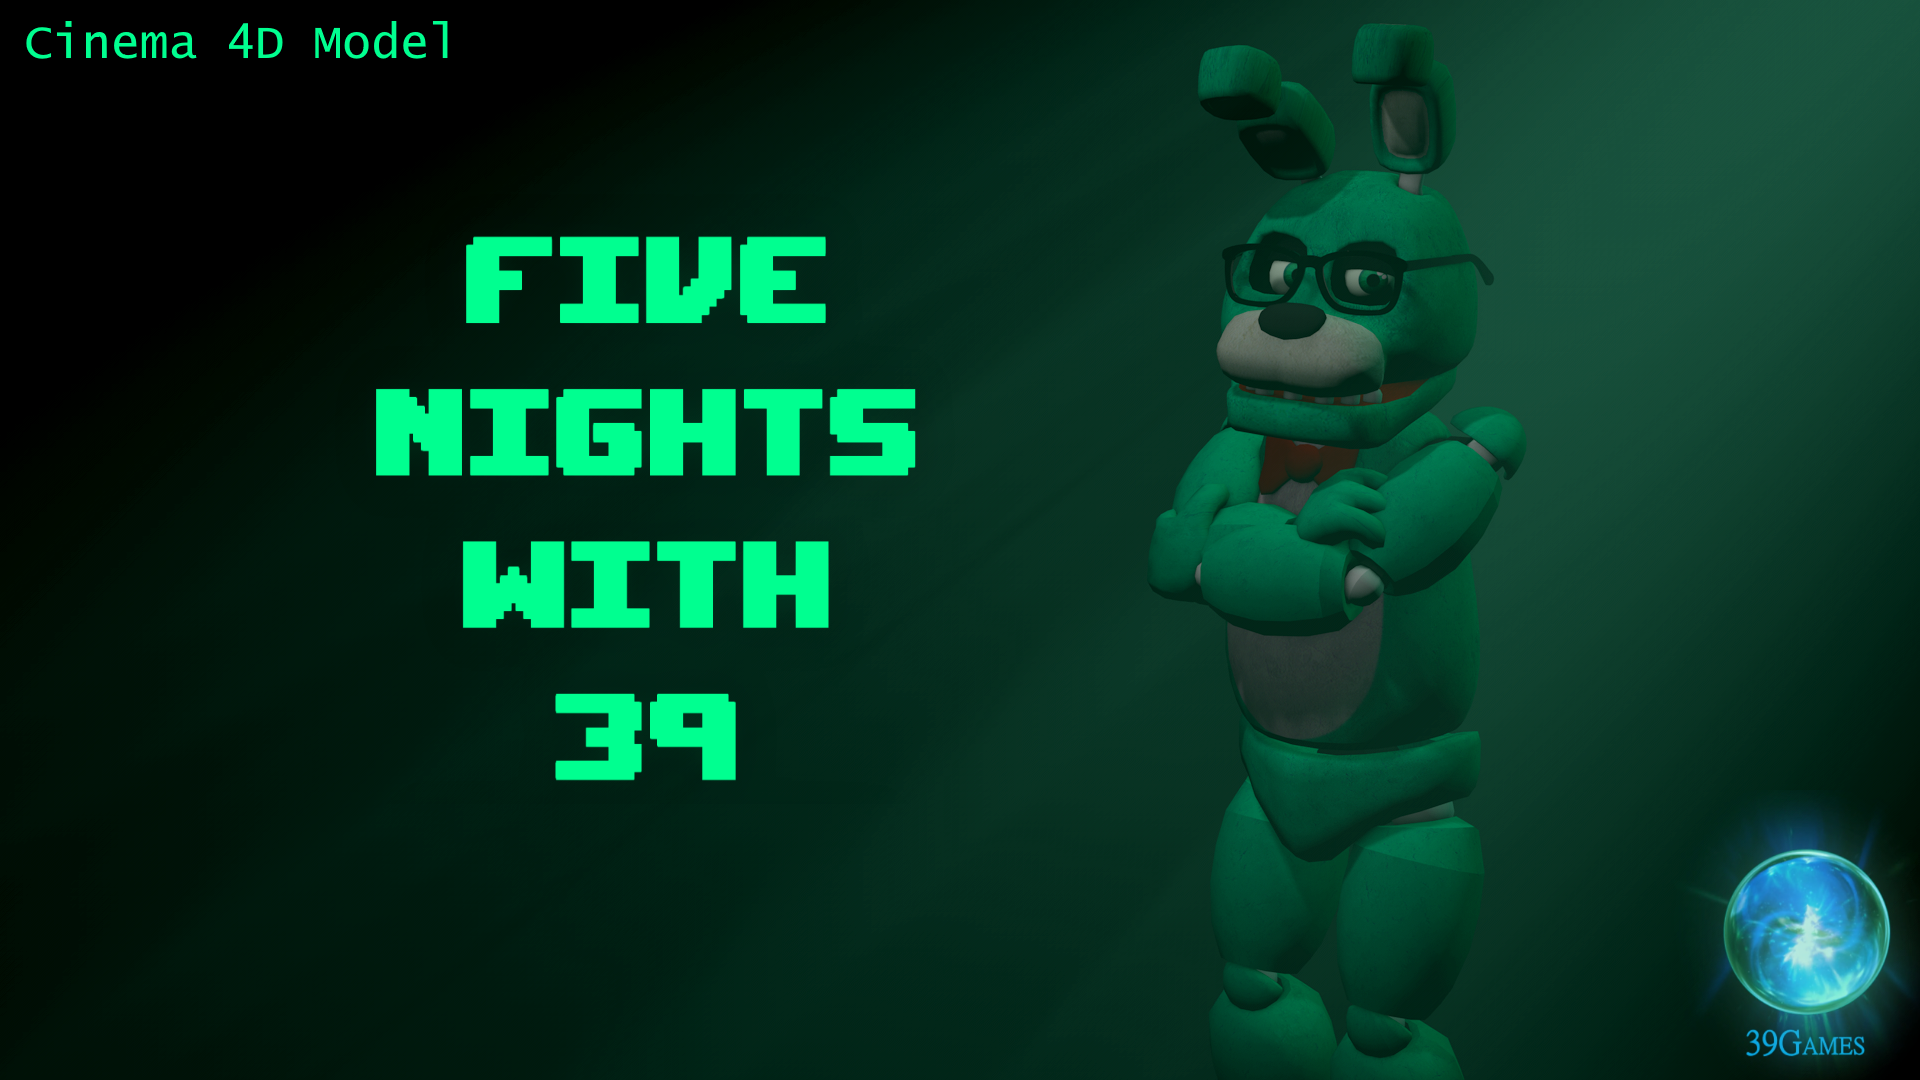 Five Nights at Candy's World: The Adventure Free Download - FNAF Fan Games